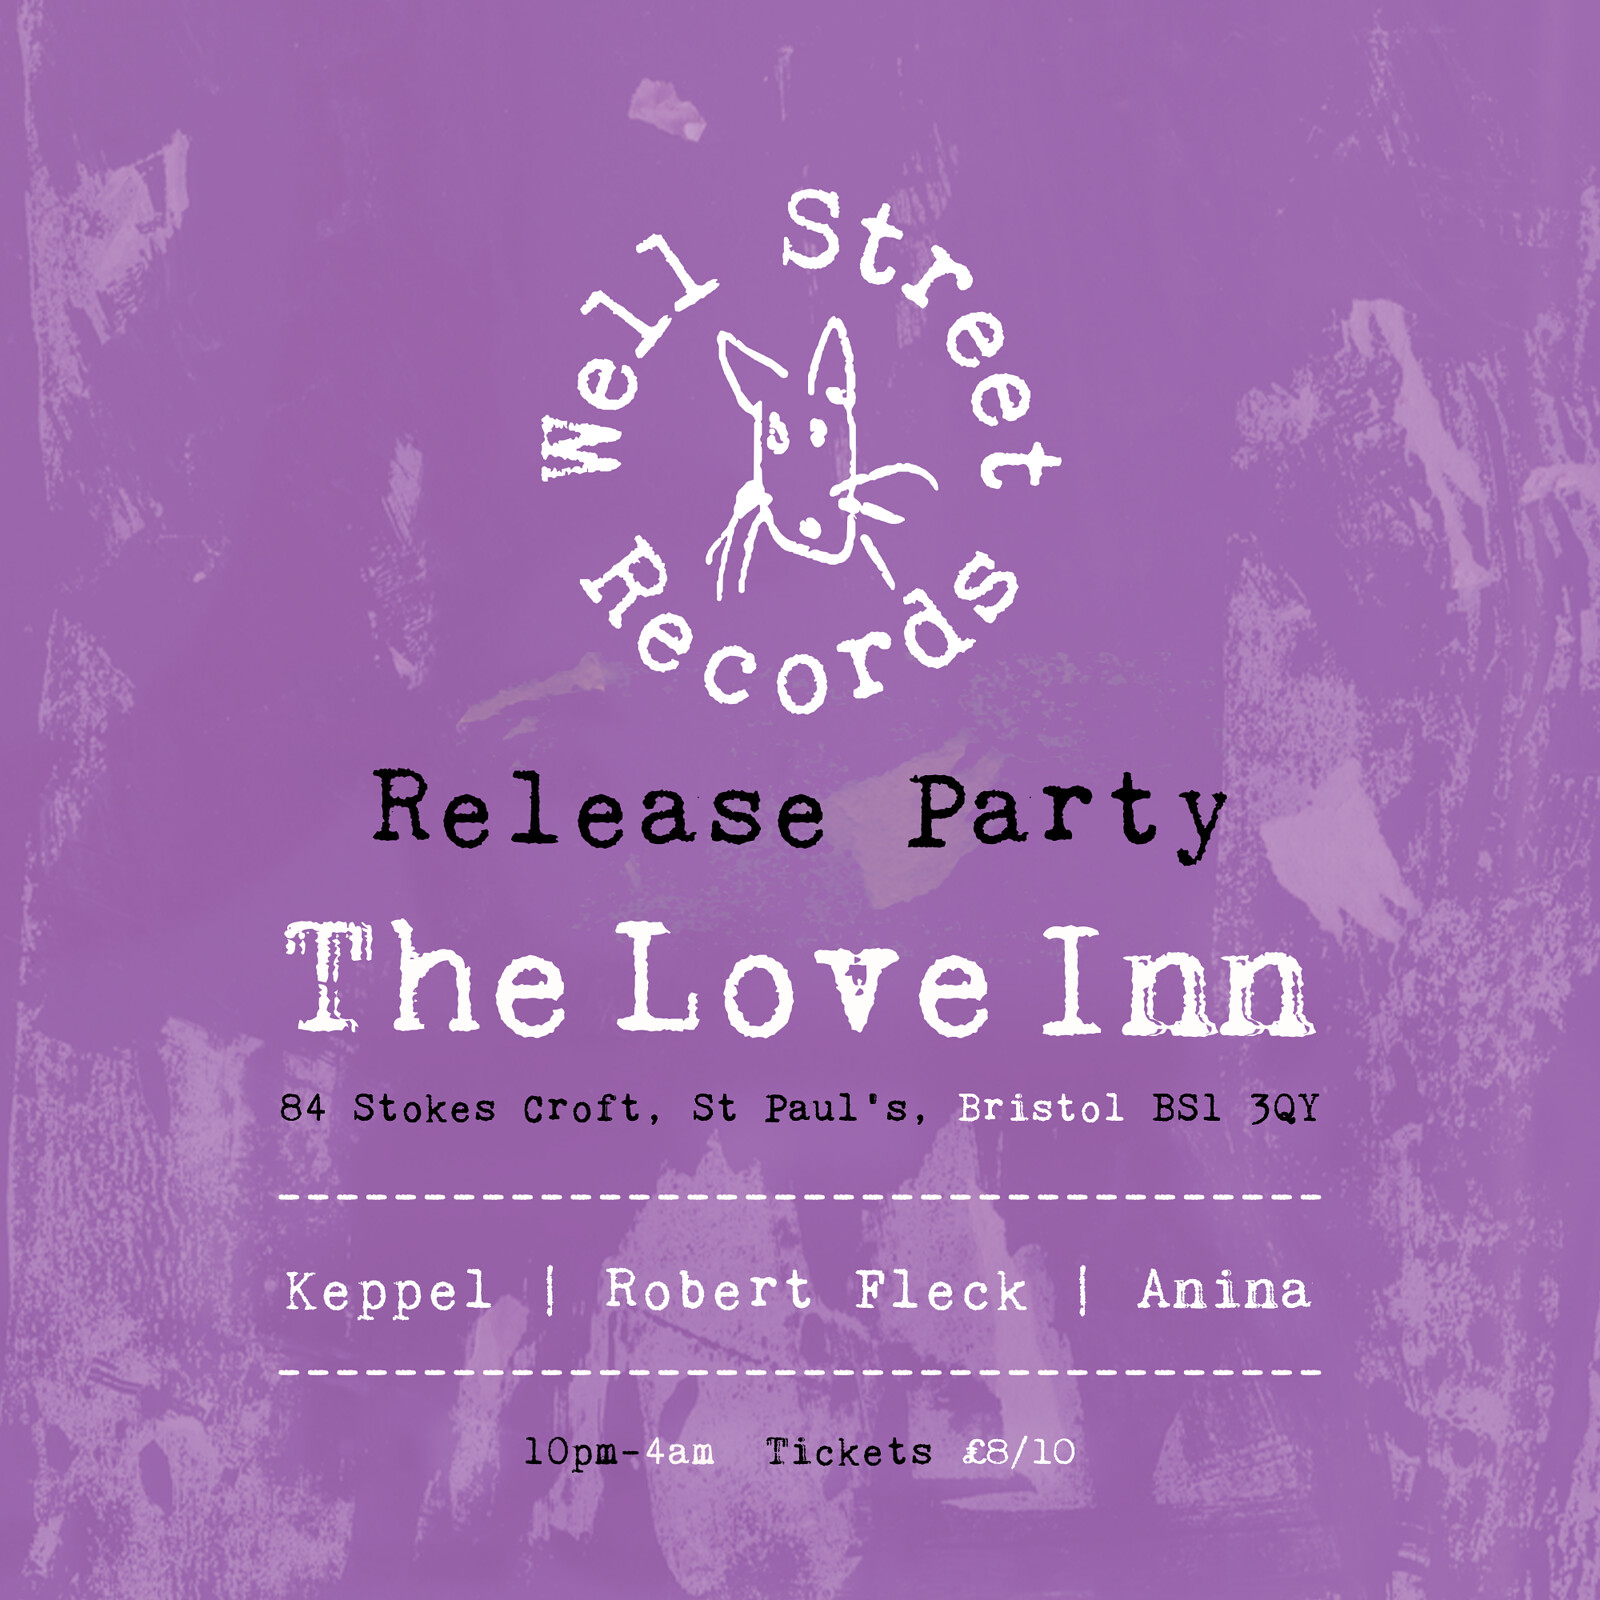 Well Street Records - Release Party at The Love Inn